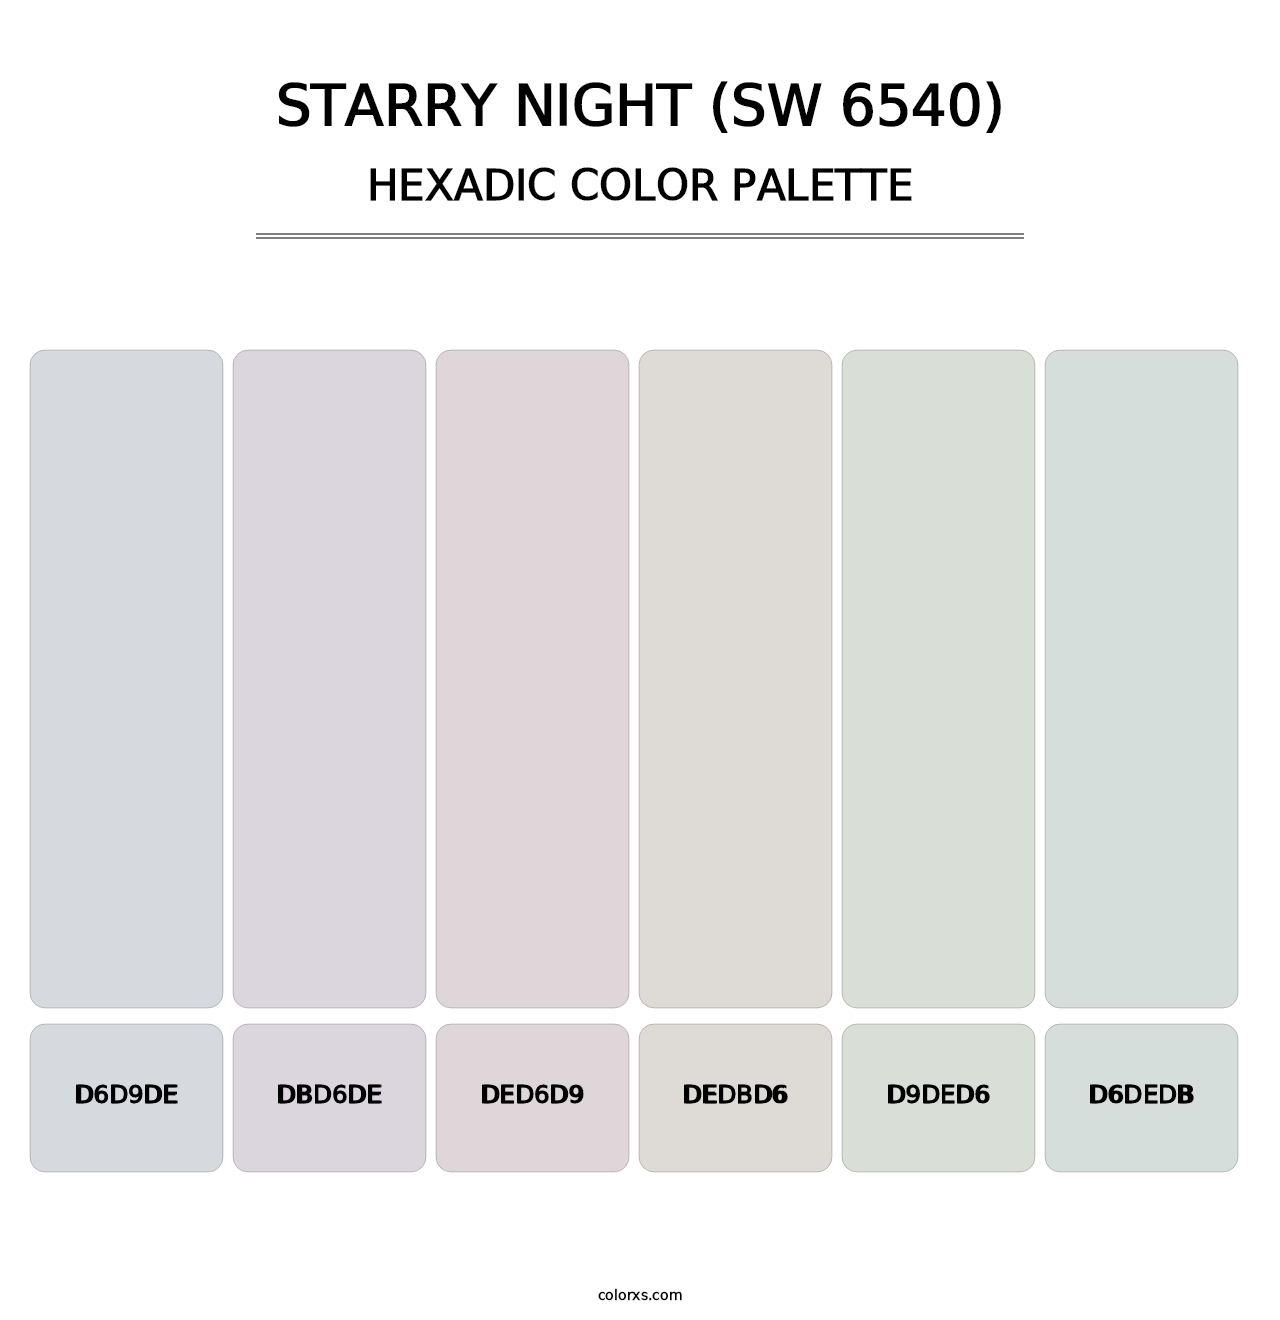 Starry Night (SW 6540) - Hexadic Color Palette